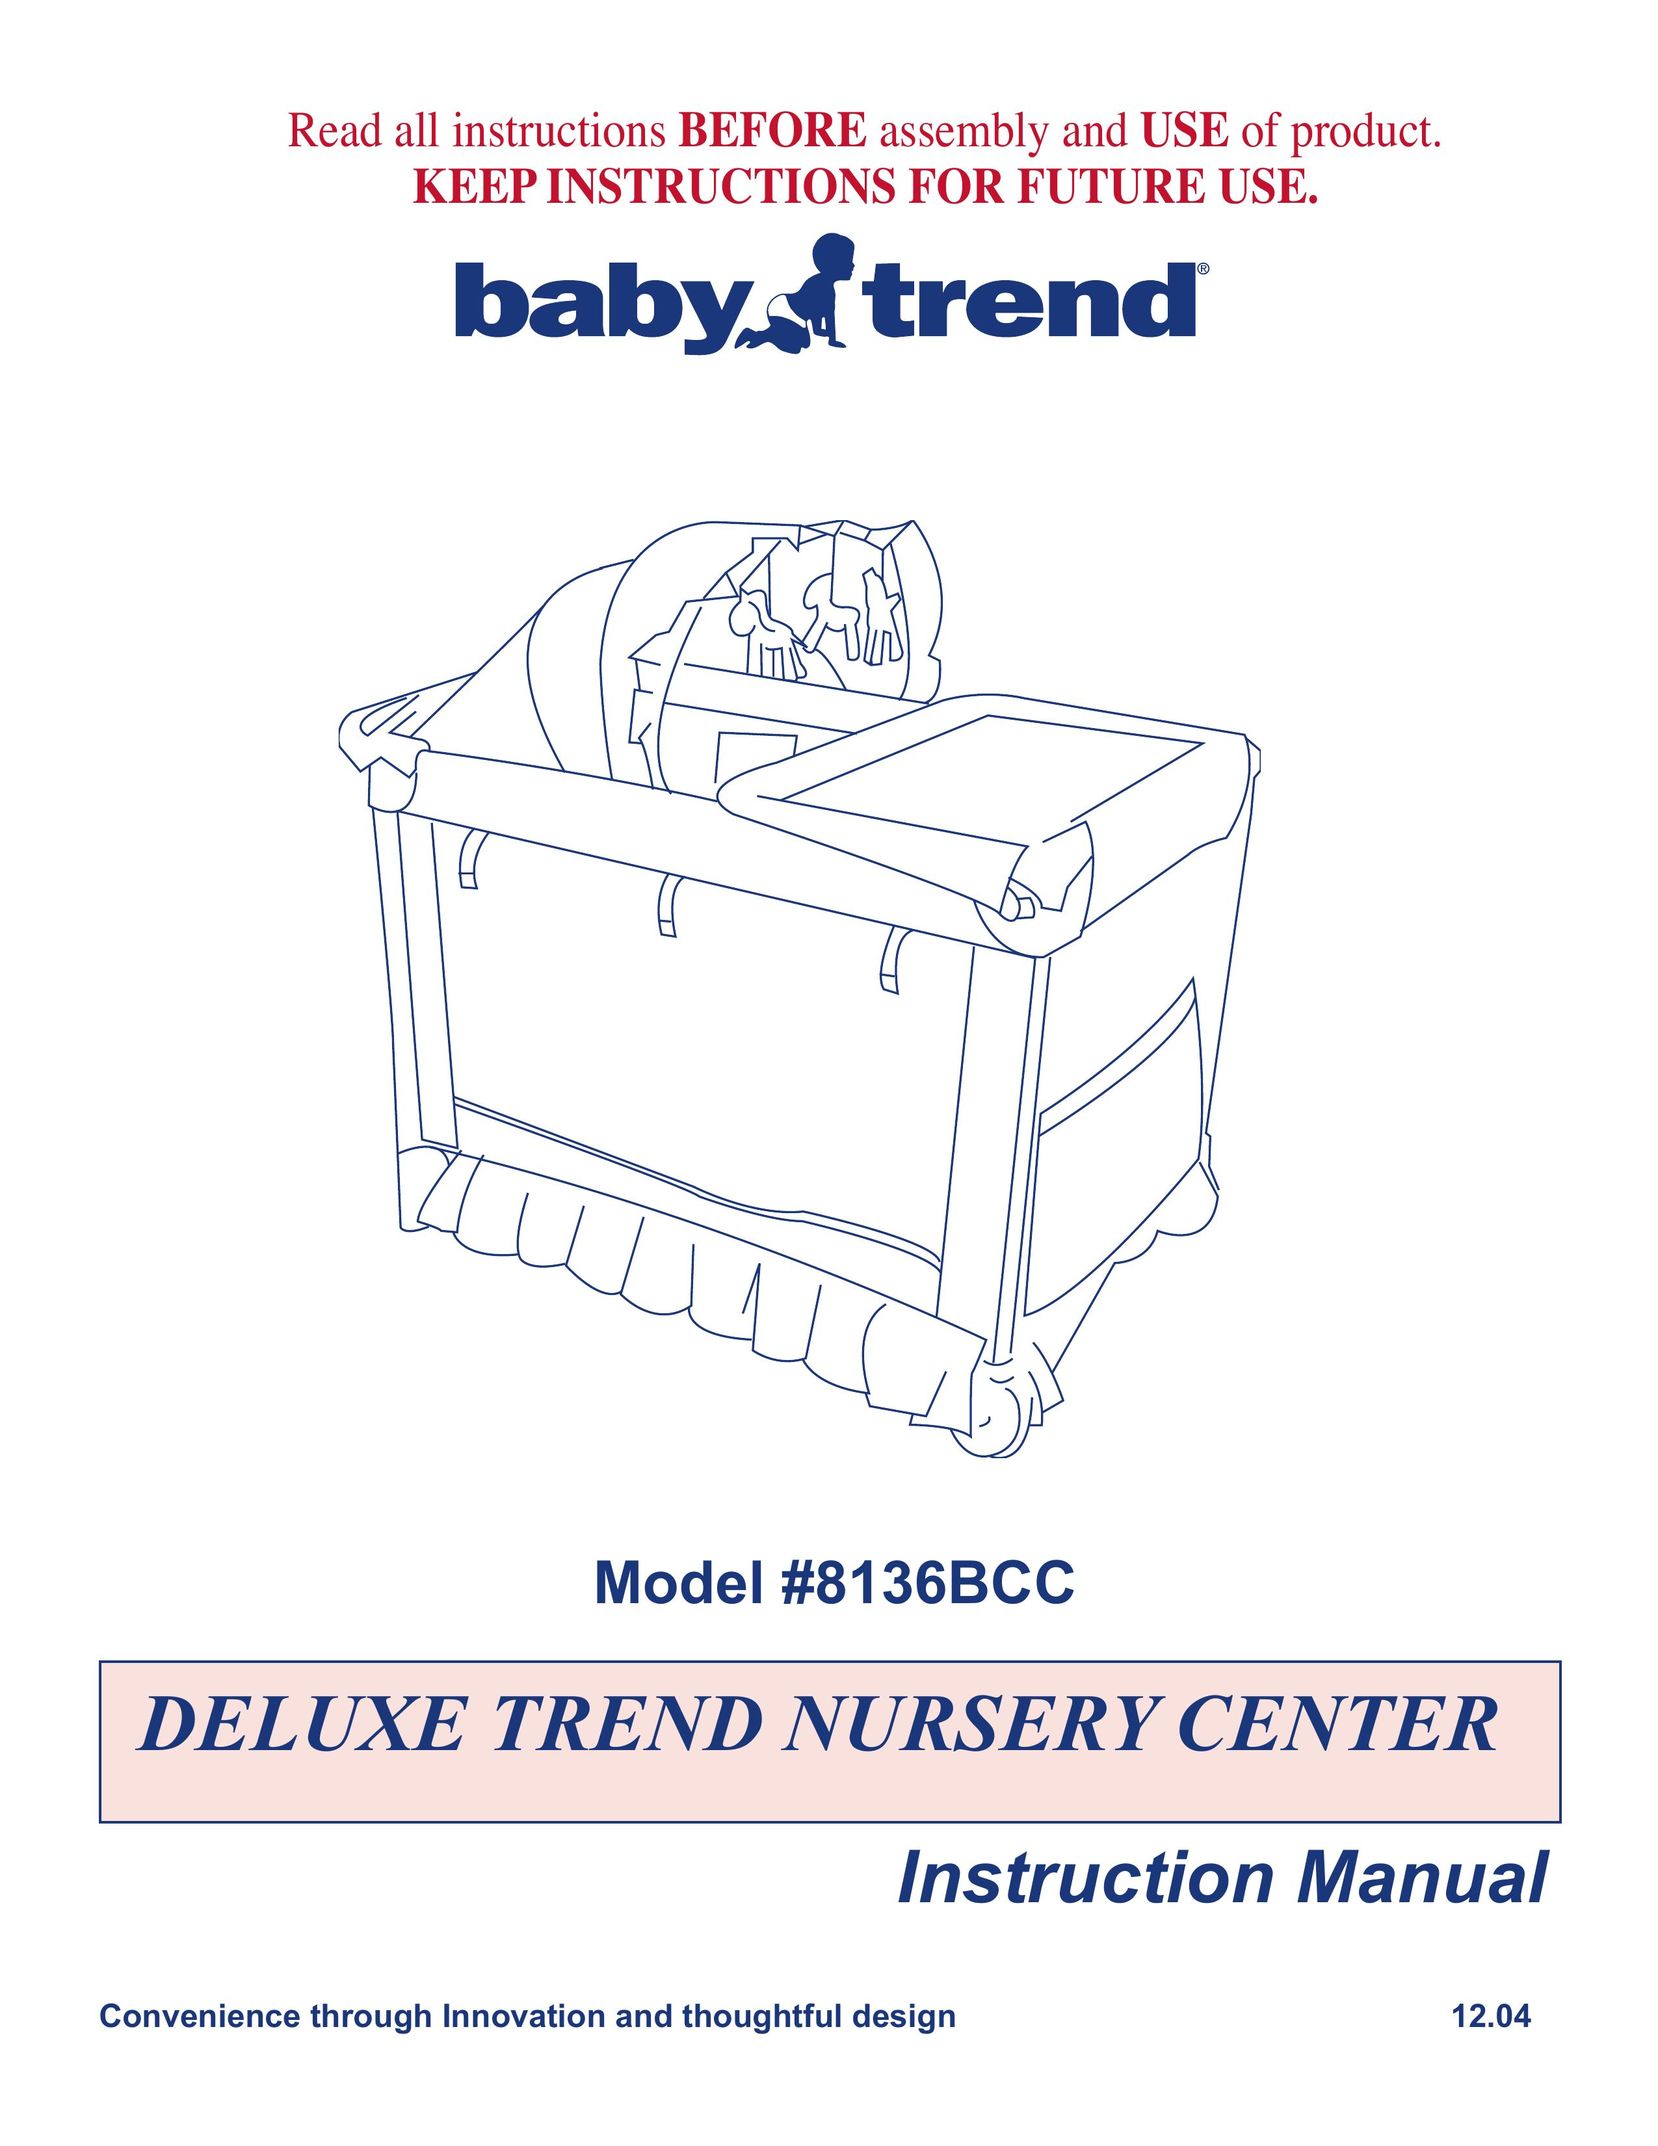 Baby Trend 8136BCC Baby Furniture User Manual